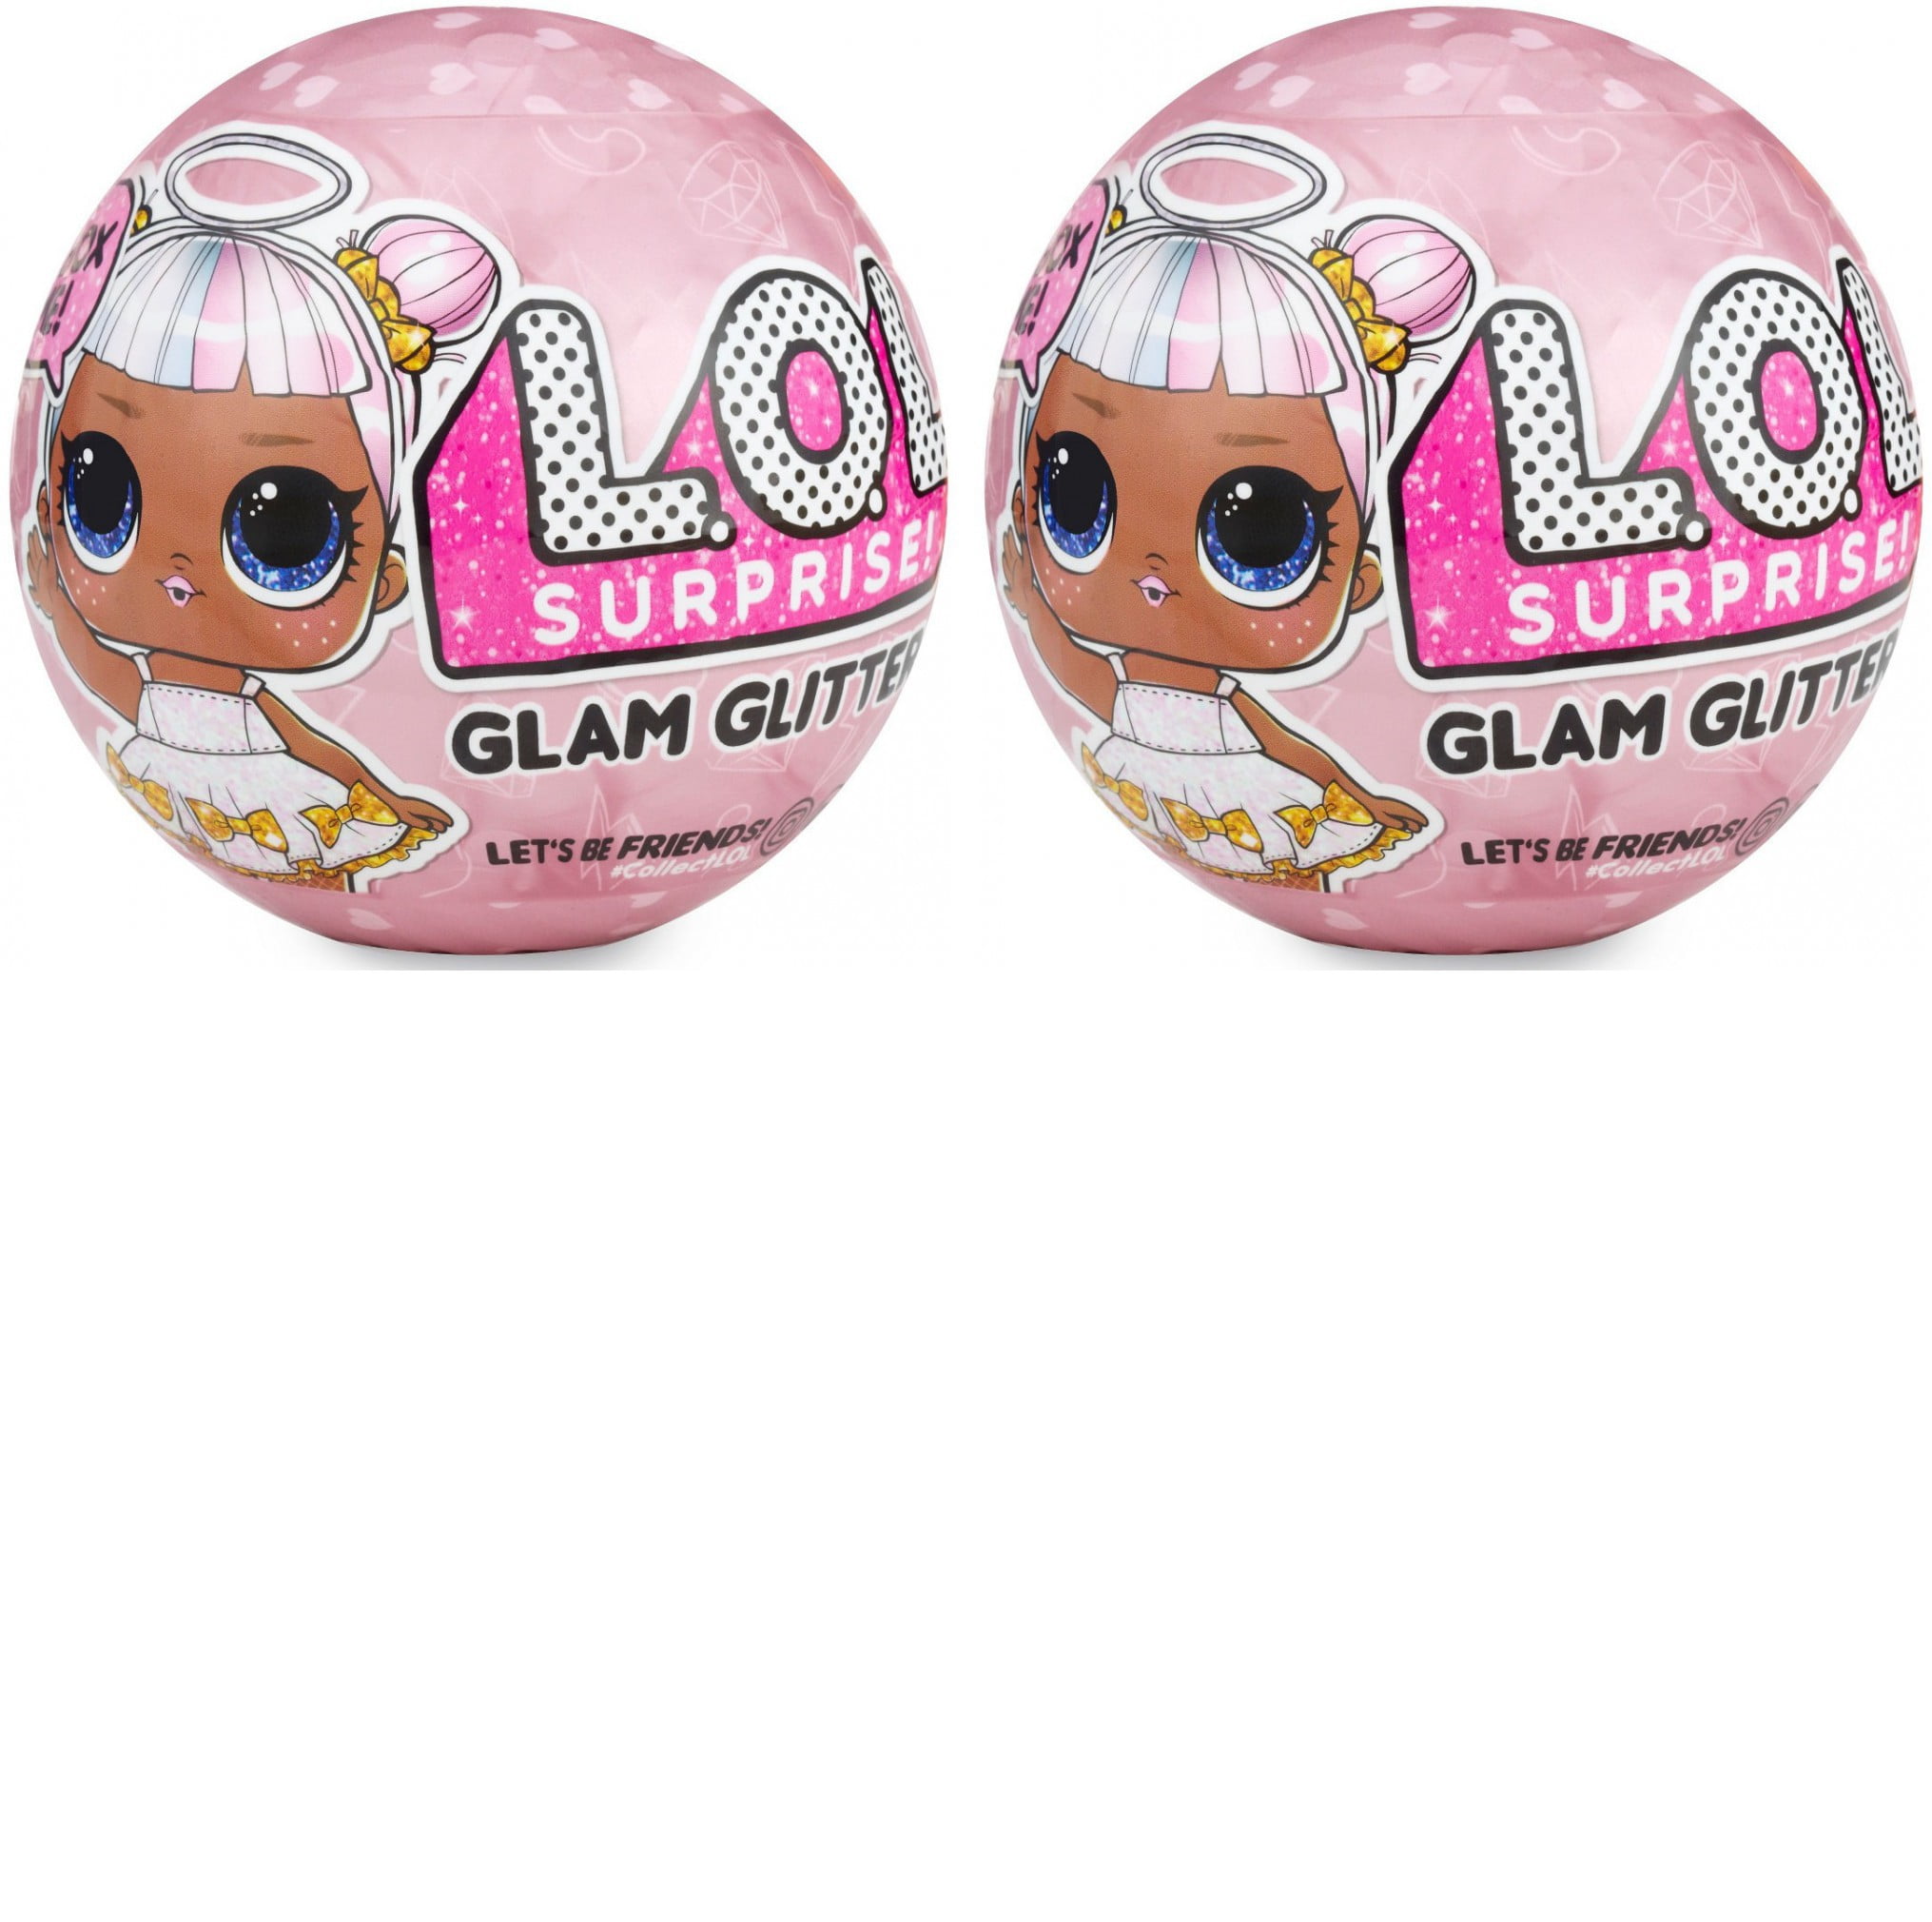 LOL Surprise Doll GLAM GLITTER Series 2 Spice toys Christmas gifts 